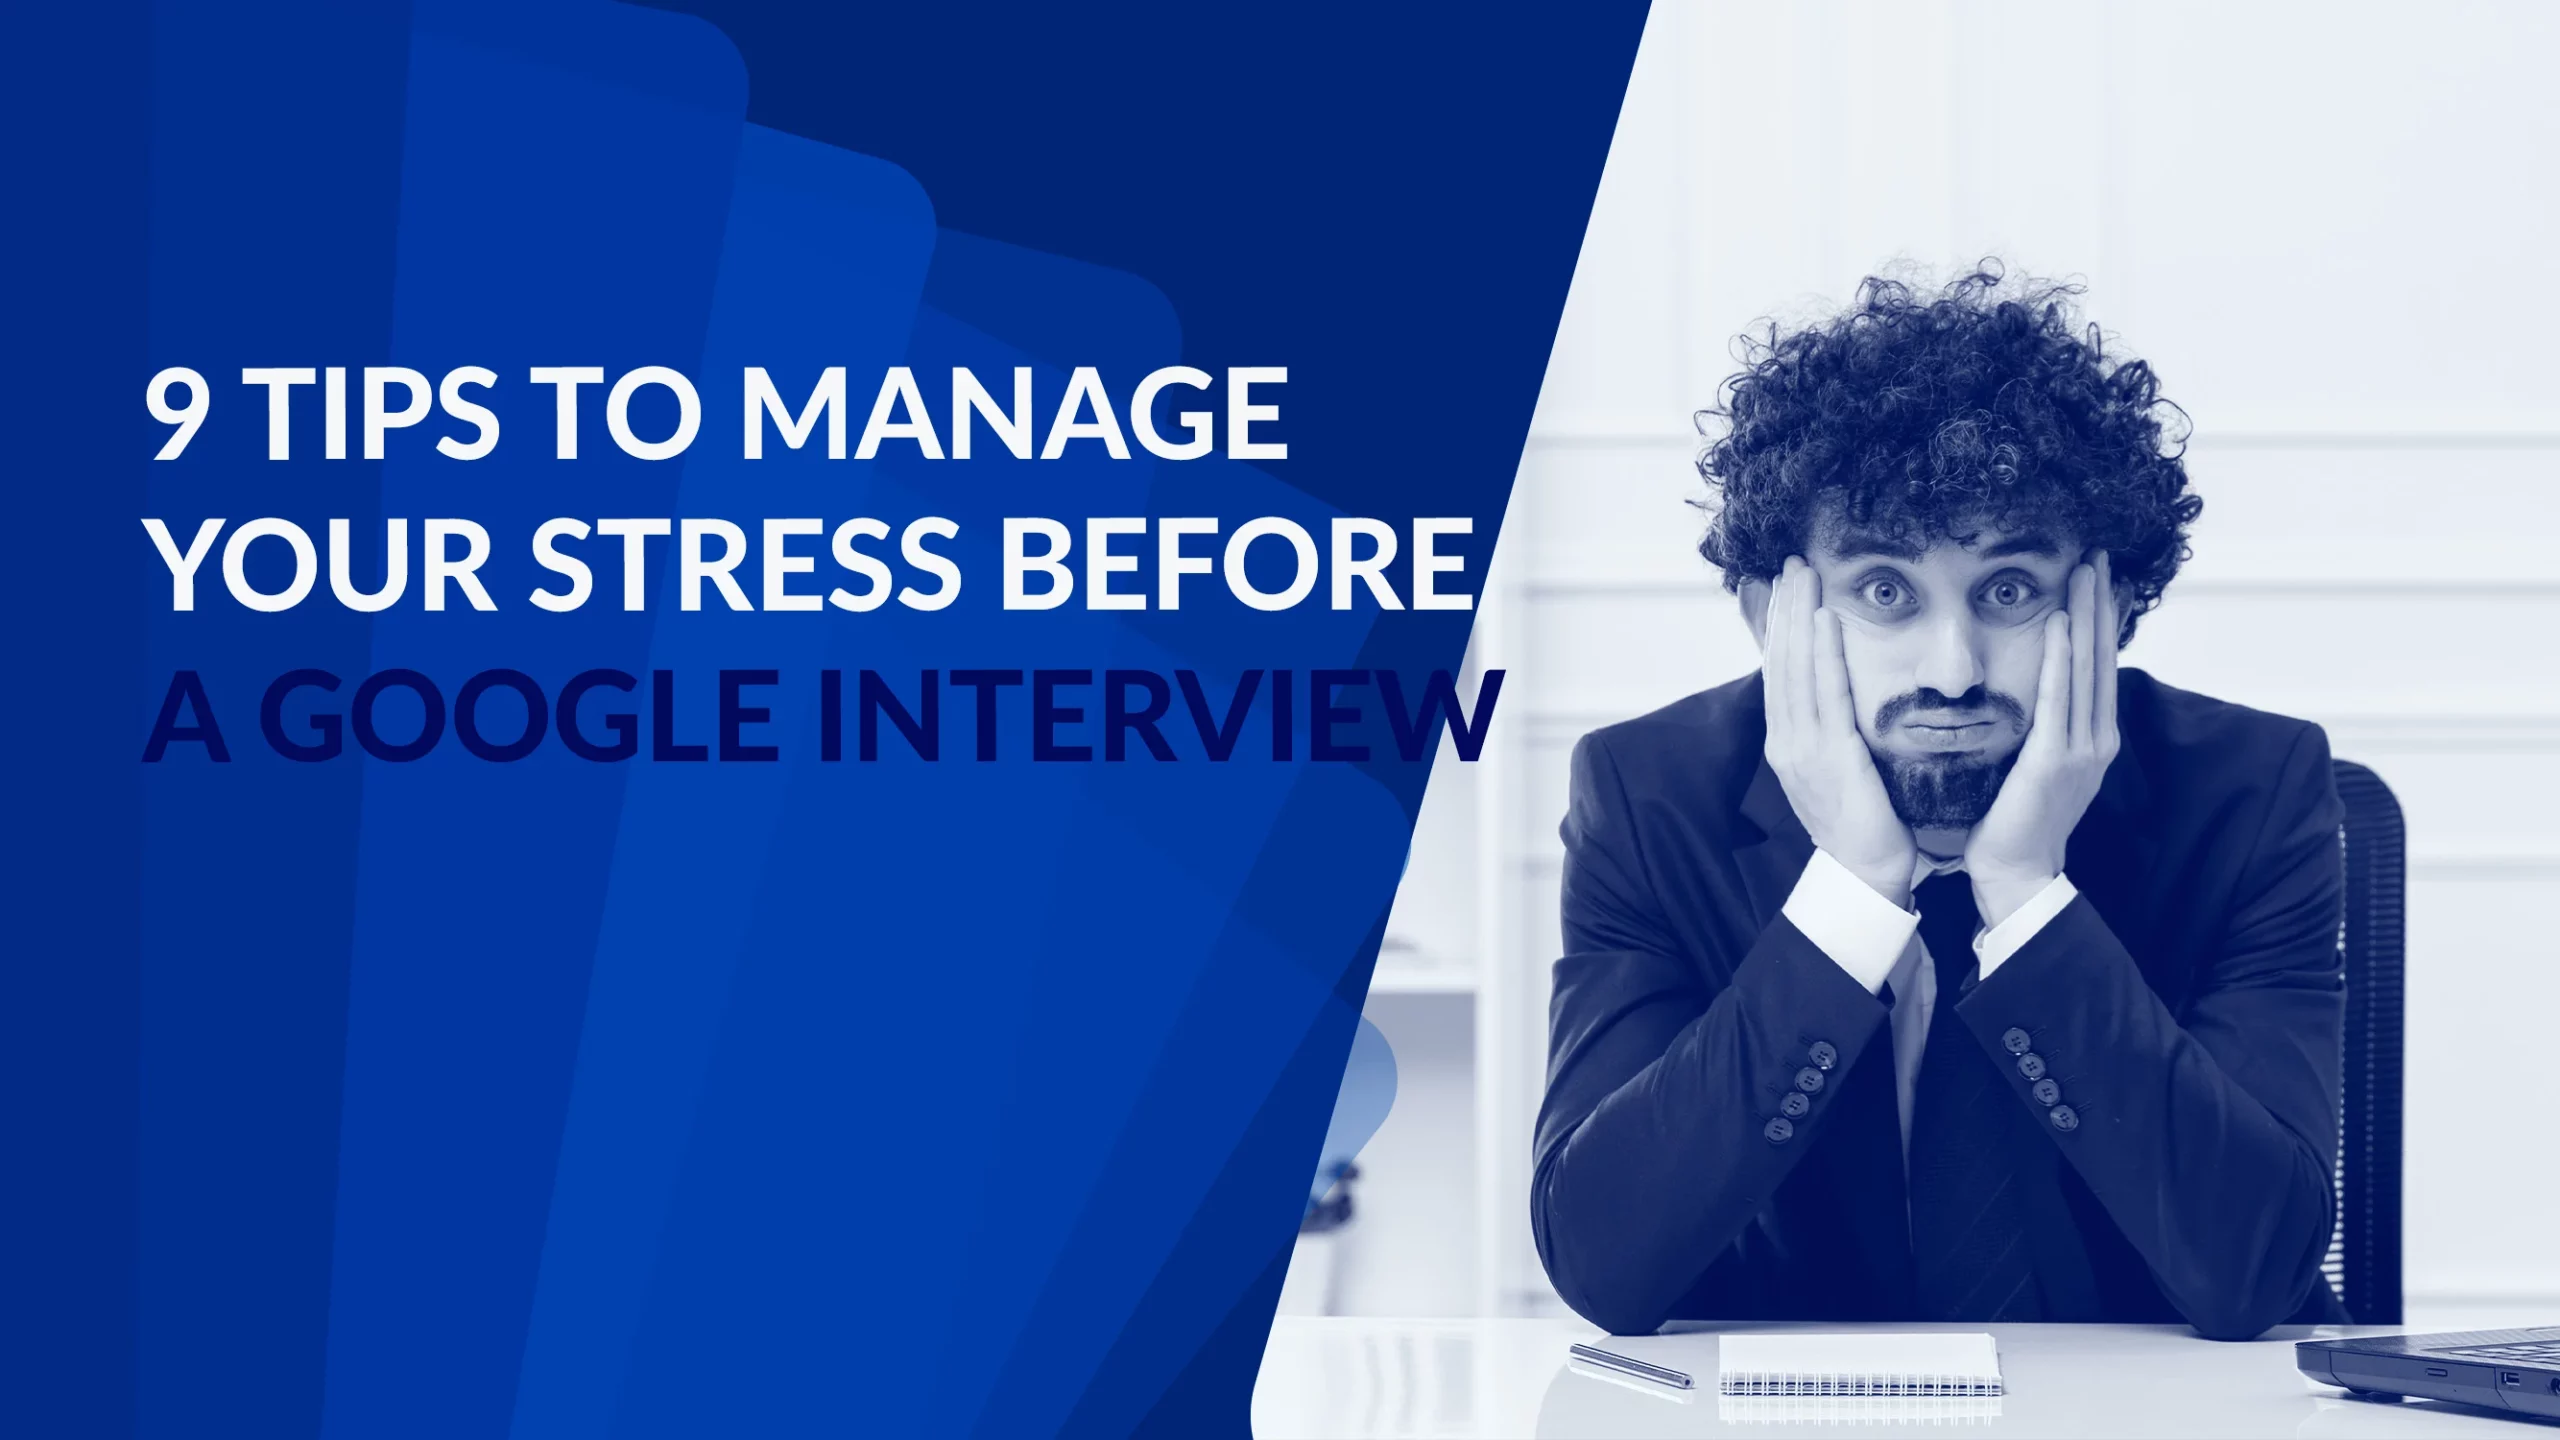 Manage Your Stress Before a Google Interview